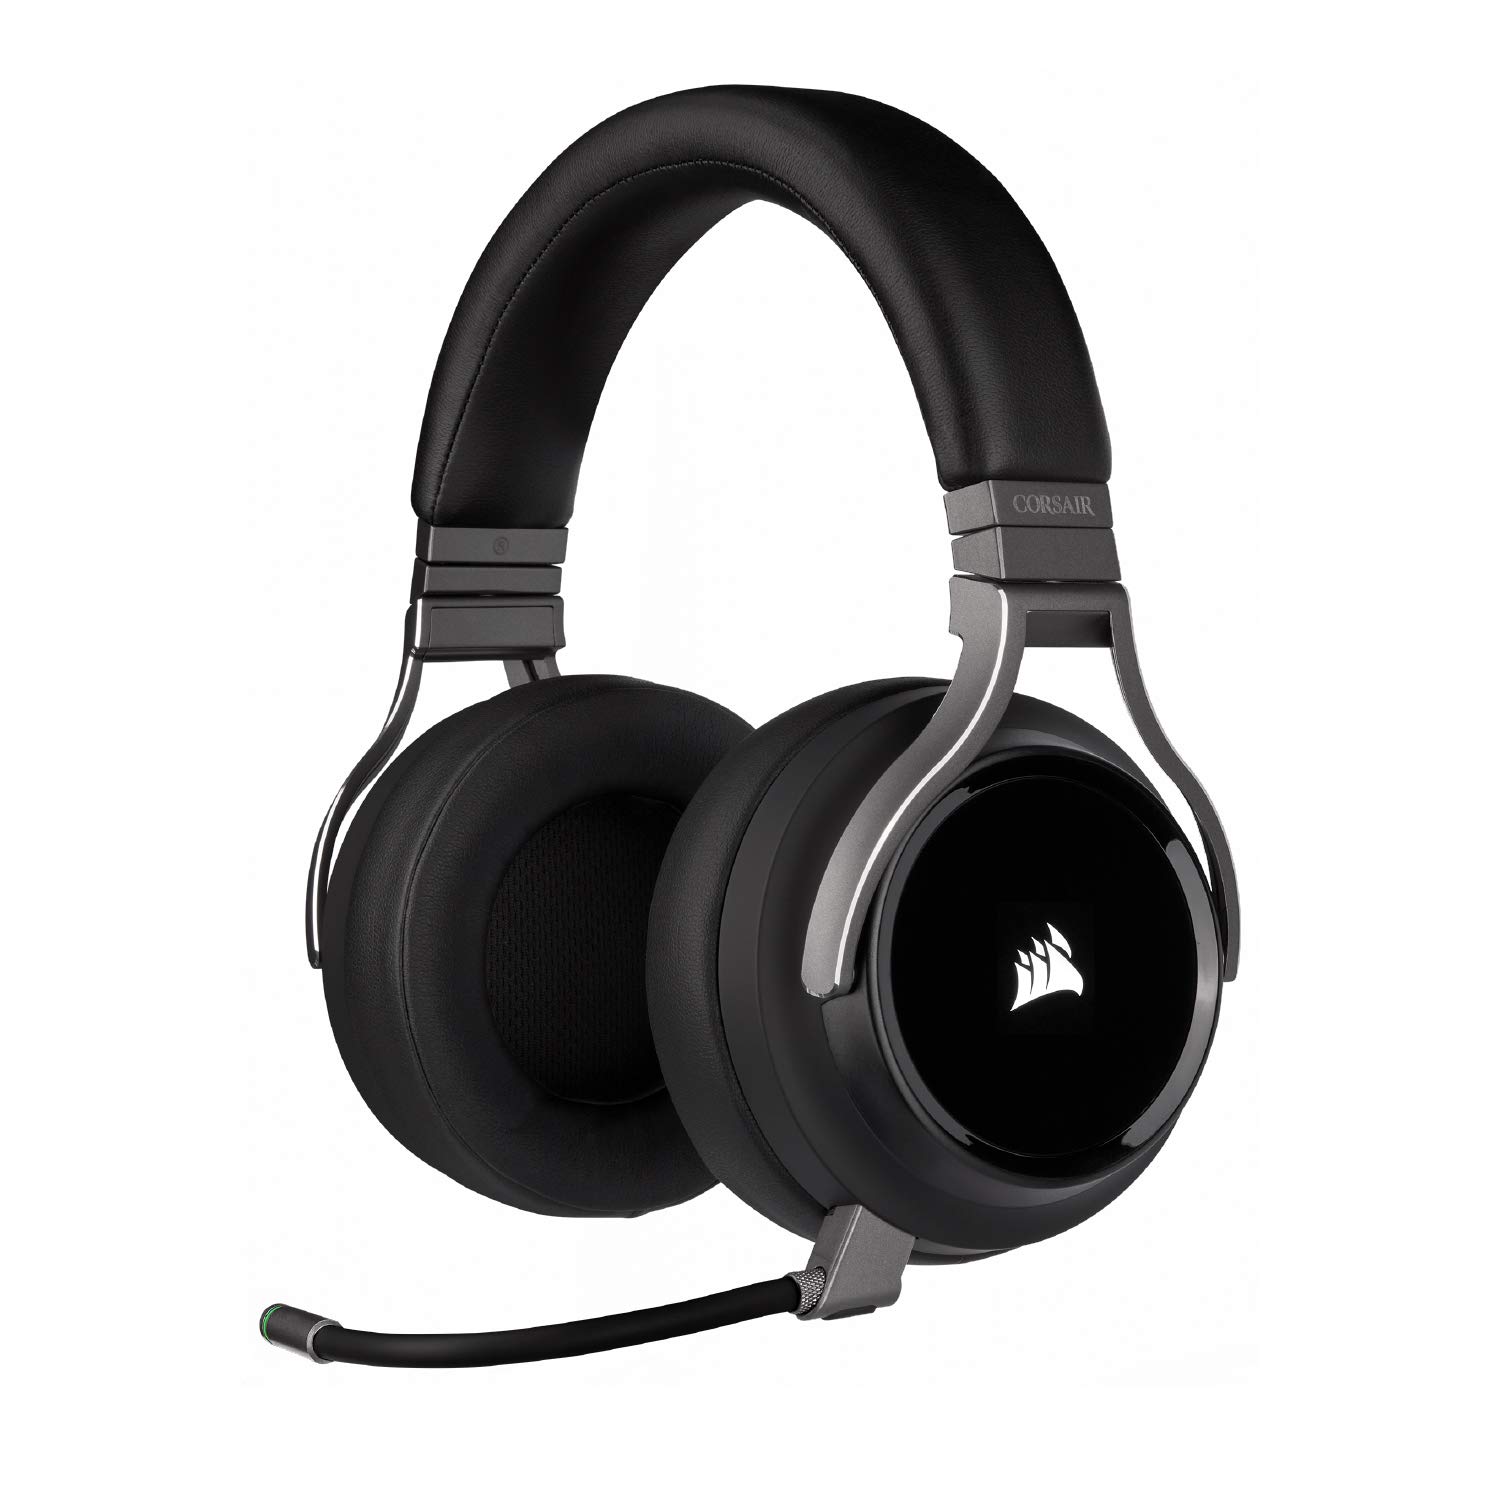 The 8 Best Corsair Headsets in 2022 - Reviews and Comparison